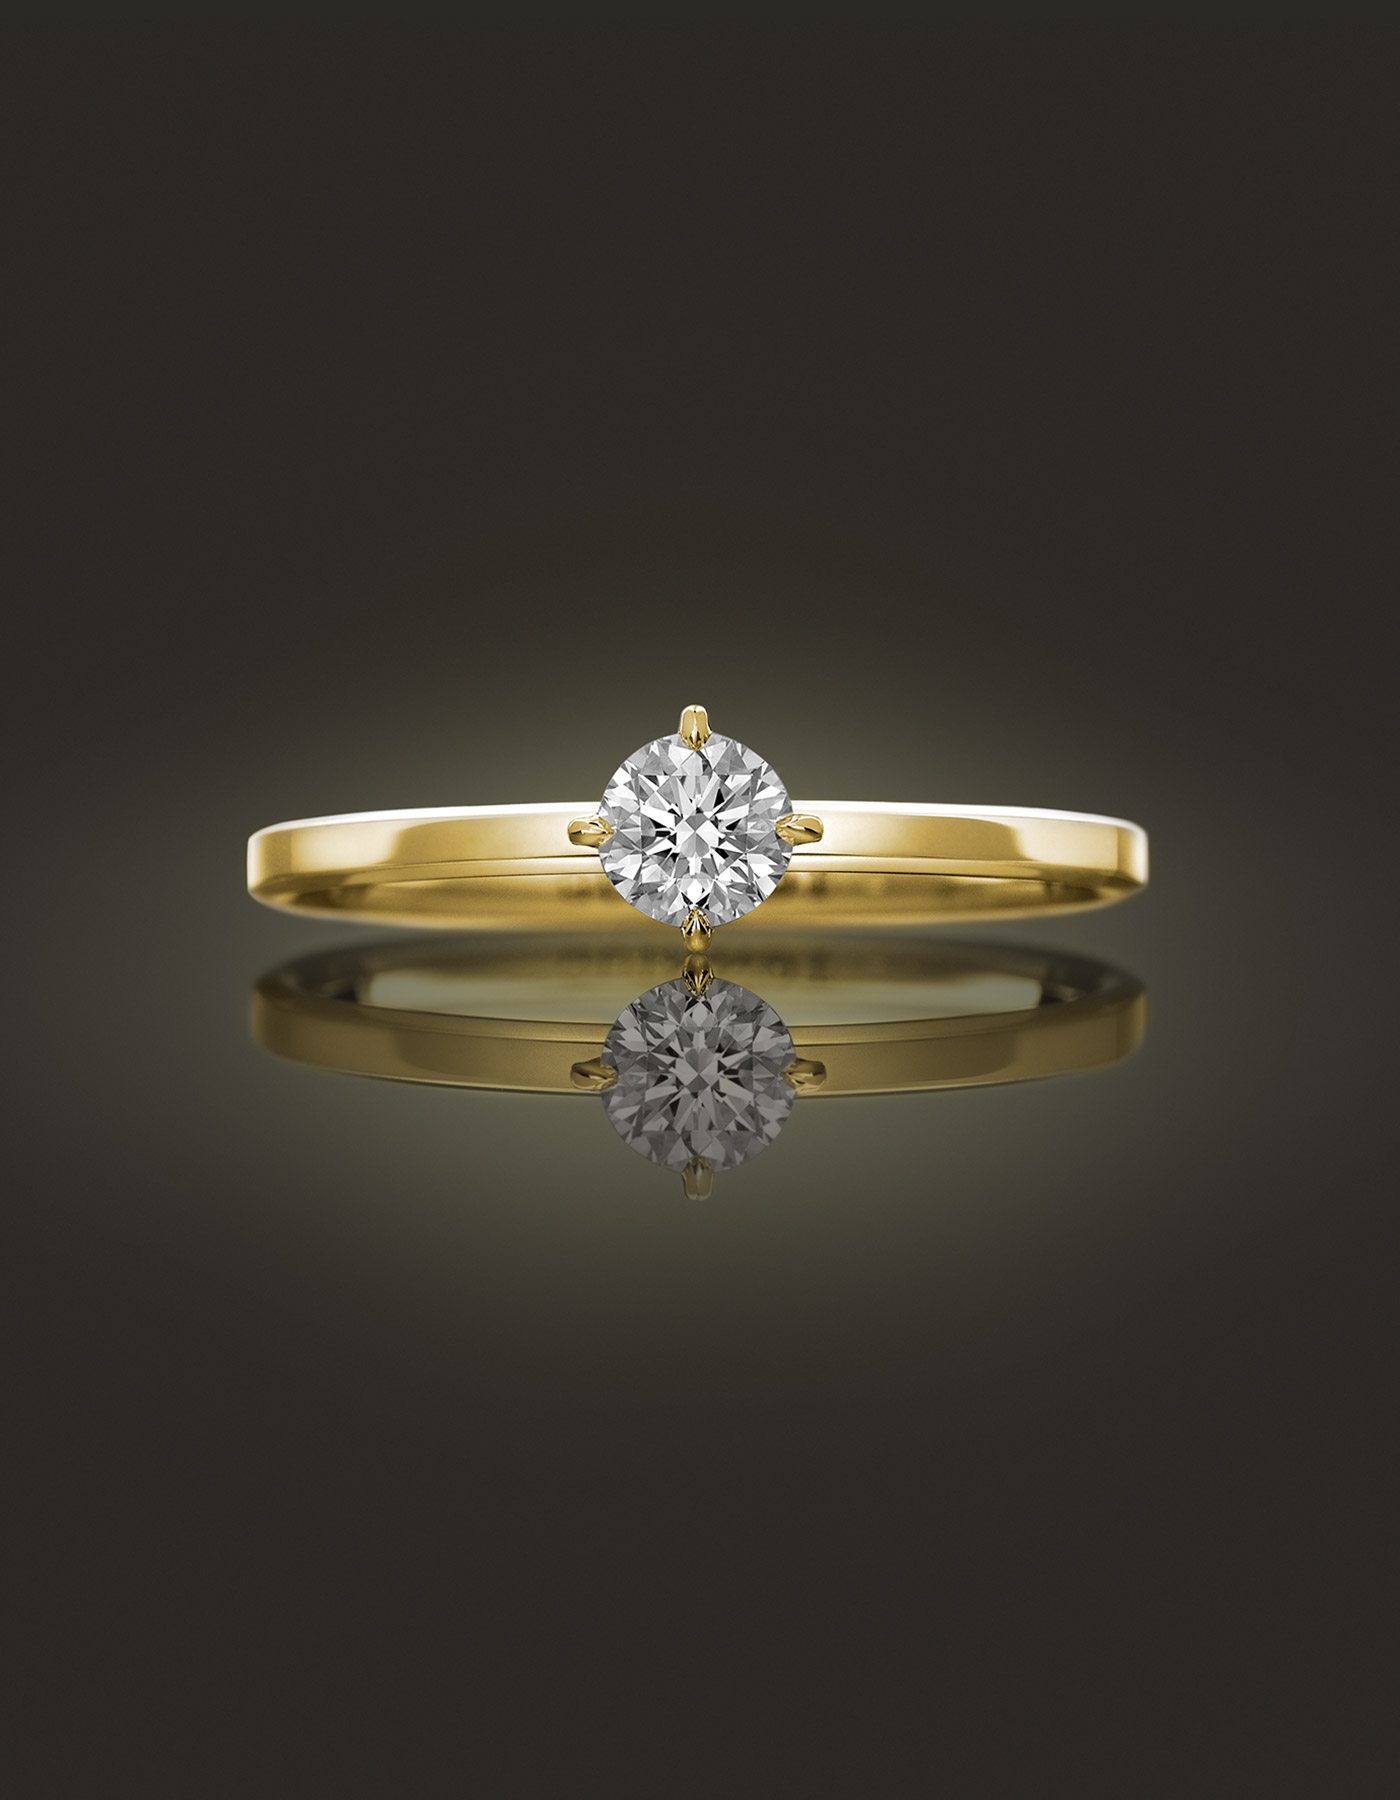 Guinnot Anonymous Solitaire diamond ring in 18k yellow gold